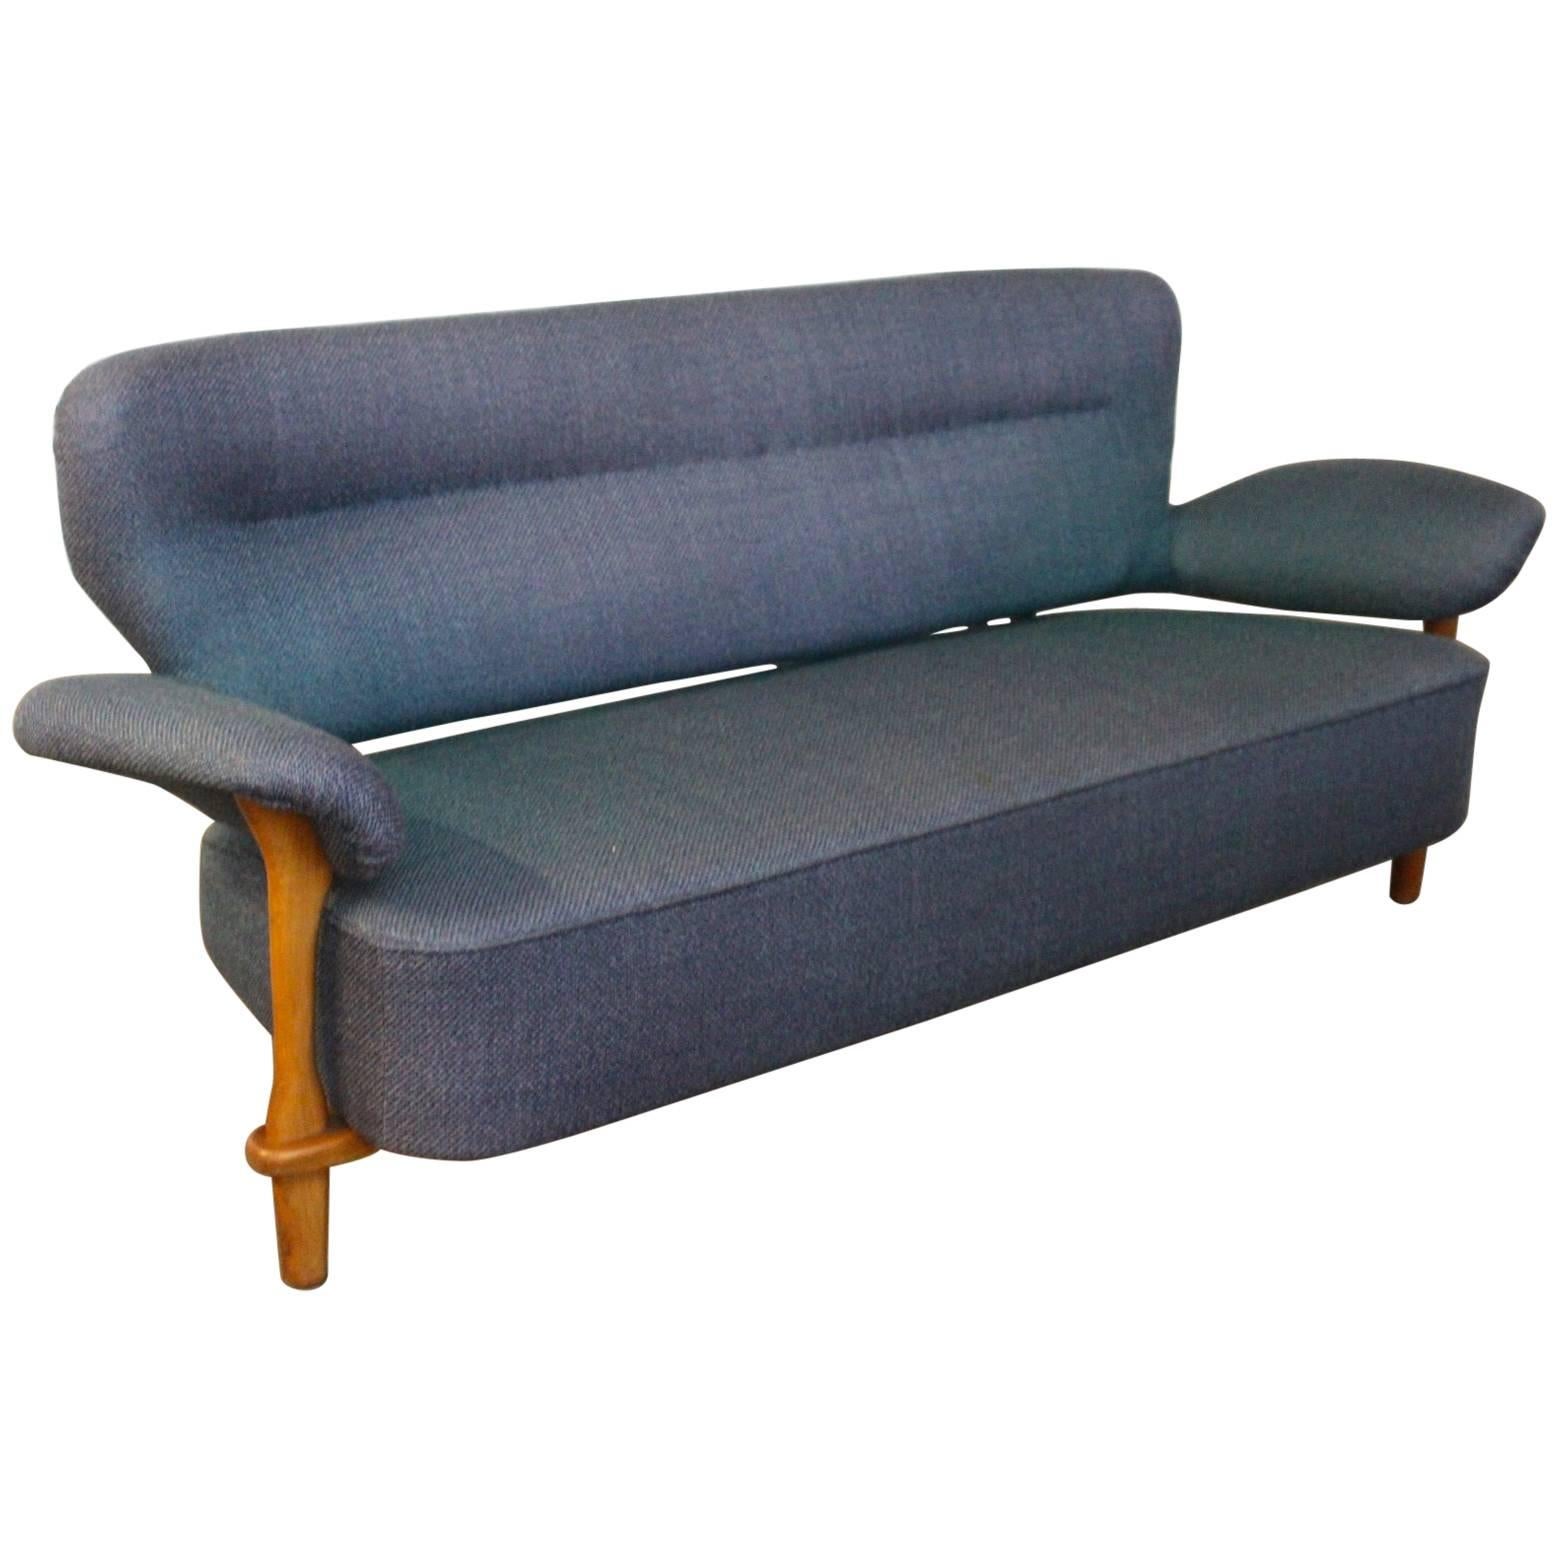 Wonderful 3-seat sofa by famous Dutch designer Theo Ruth for Artifort, 1950's. This is a rare model 109 Artifort sofa in a beautiful high-quality spotless blue wool upholstery. Notice the beautifully sculpted wood frame and the organic design. Seen